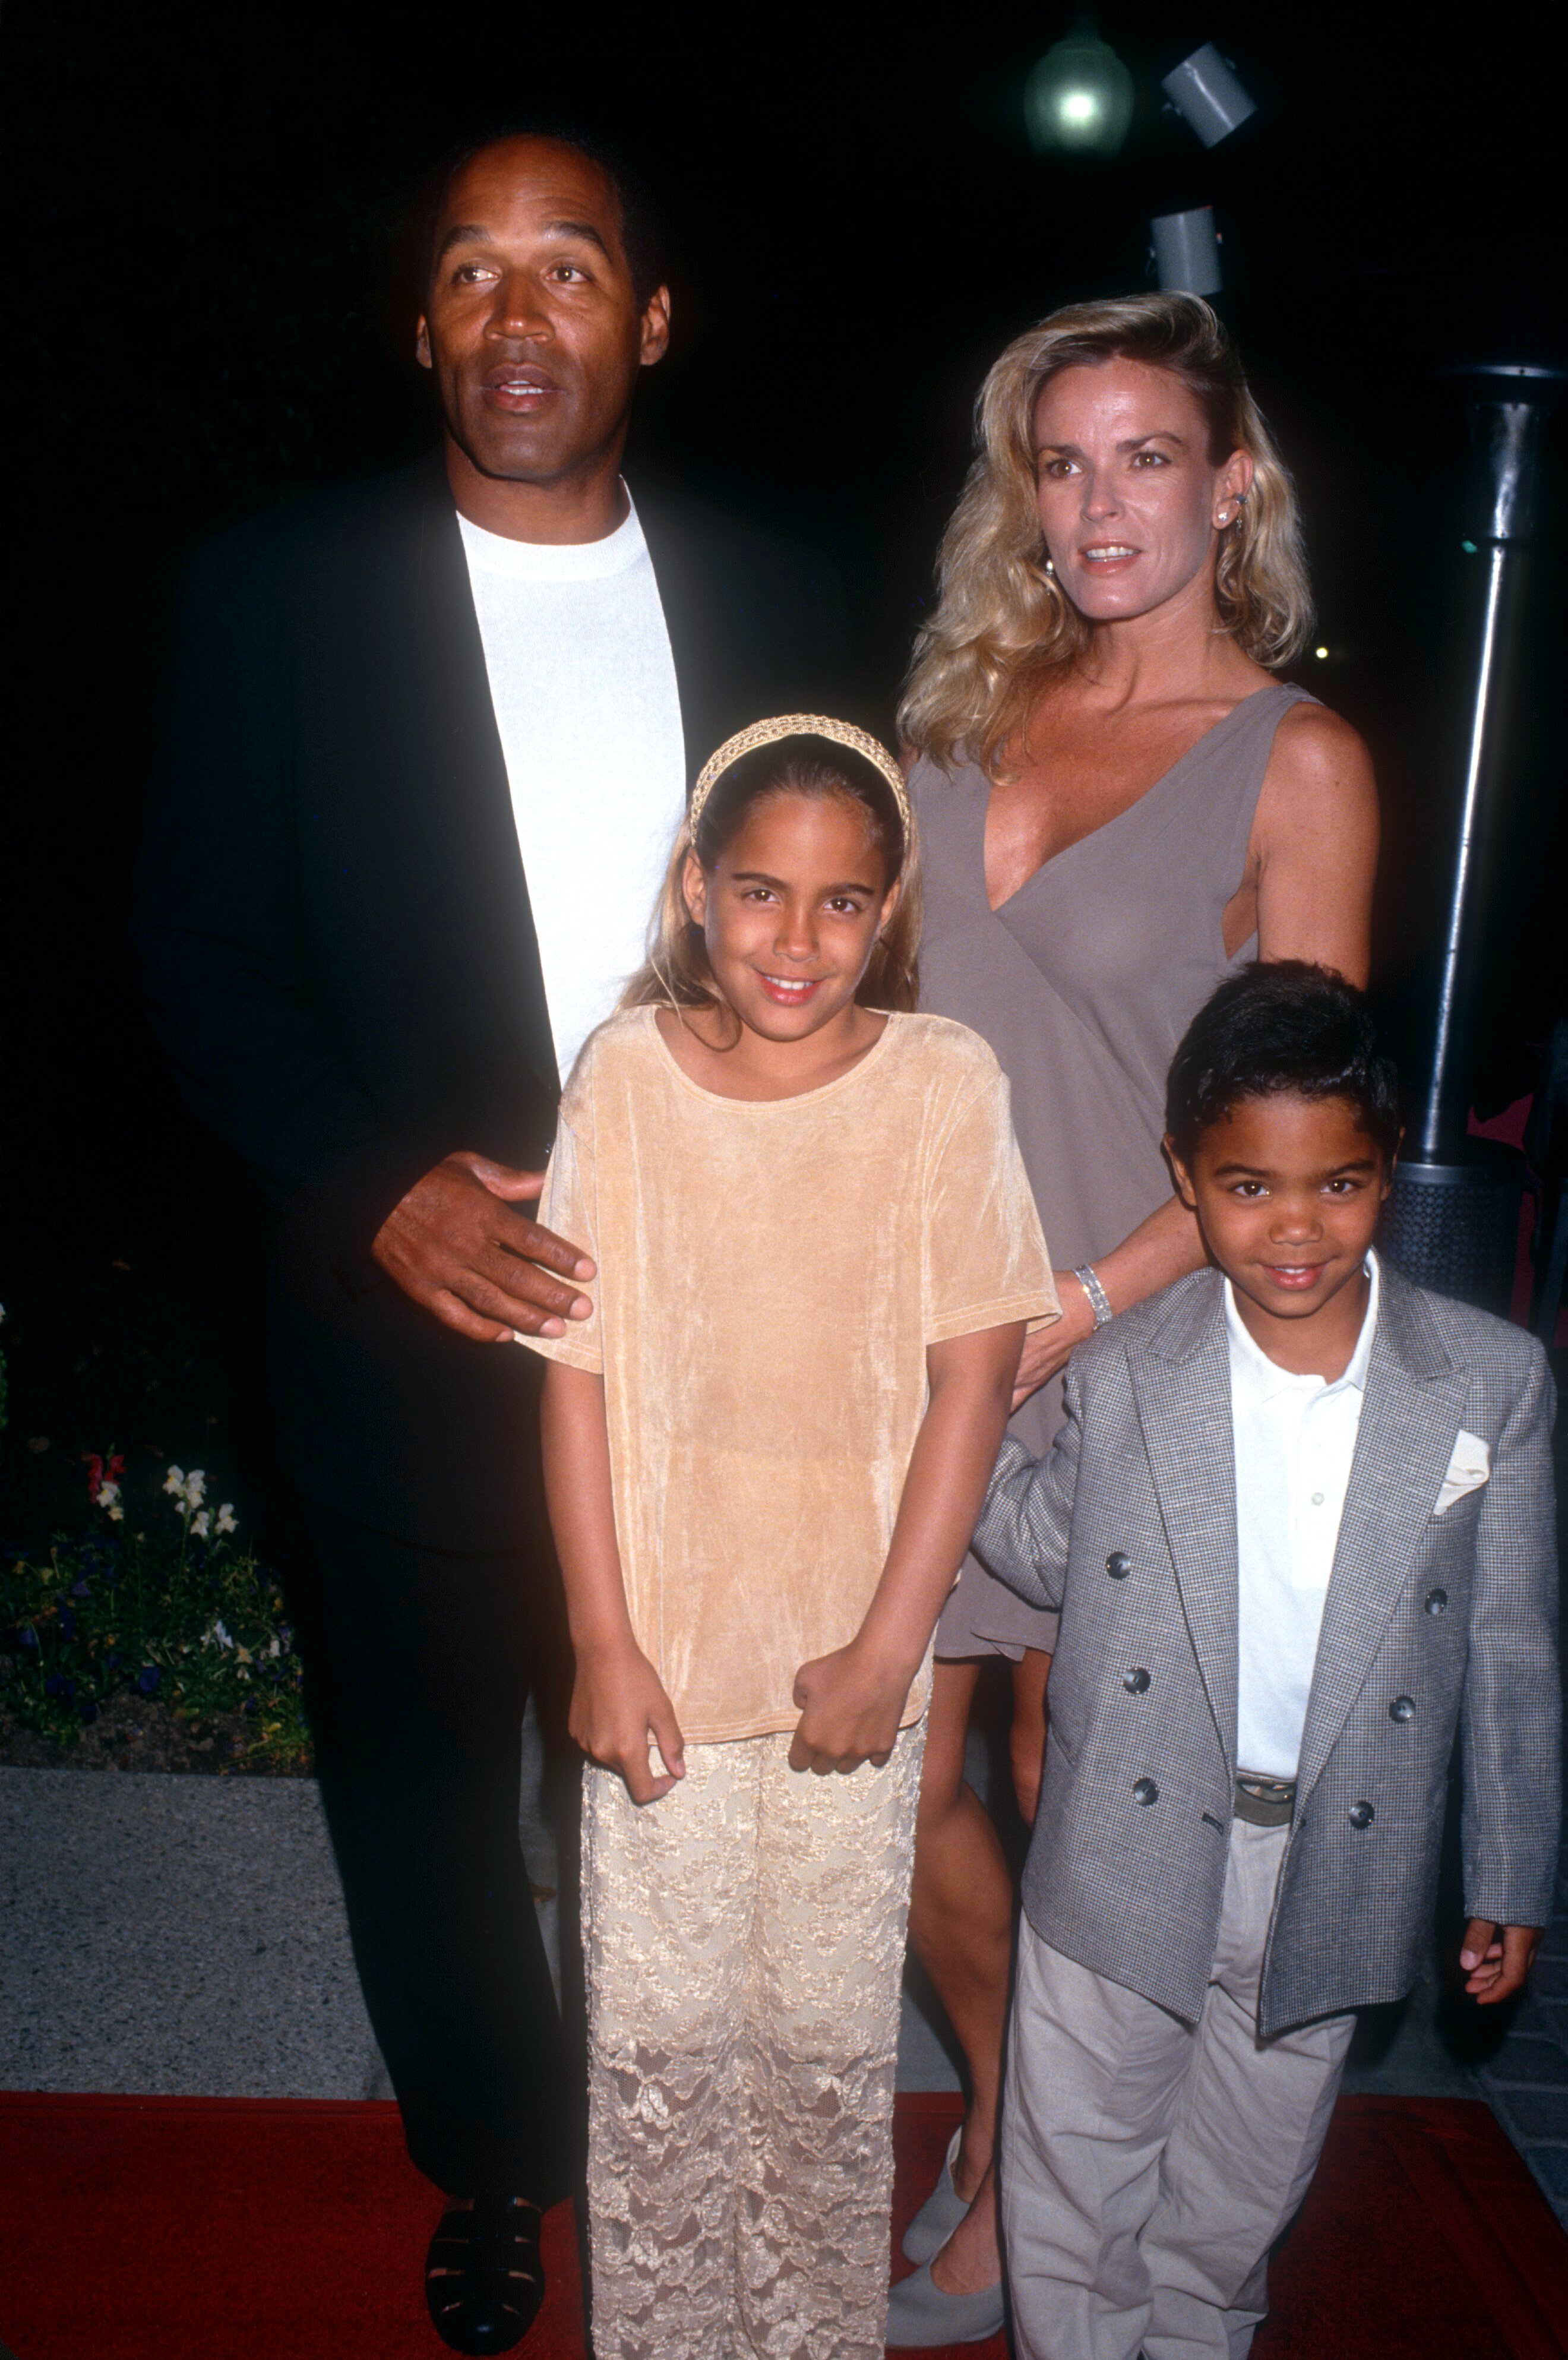 O.J. Simpson and Nicole Brown Simpson with their kids, Sydney and Justin, during the "Naked Gun 33 1/3: The Final Insult" Hollywood Premiere on March 16, 1994 at the Paramount Studios in Hollywood, California. | Source: Getty Images